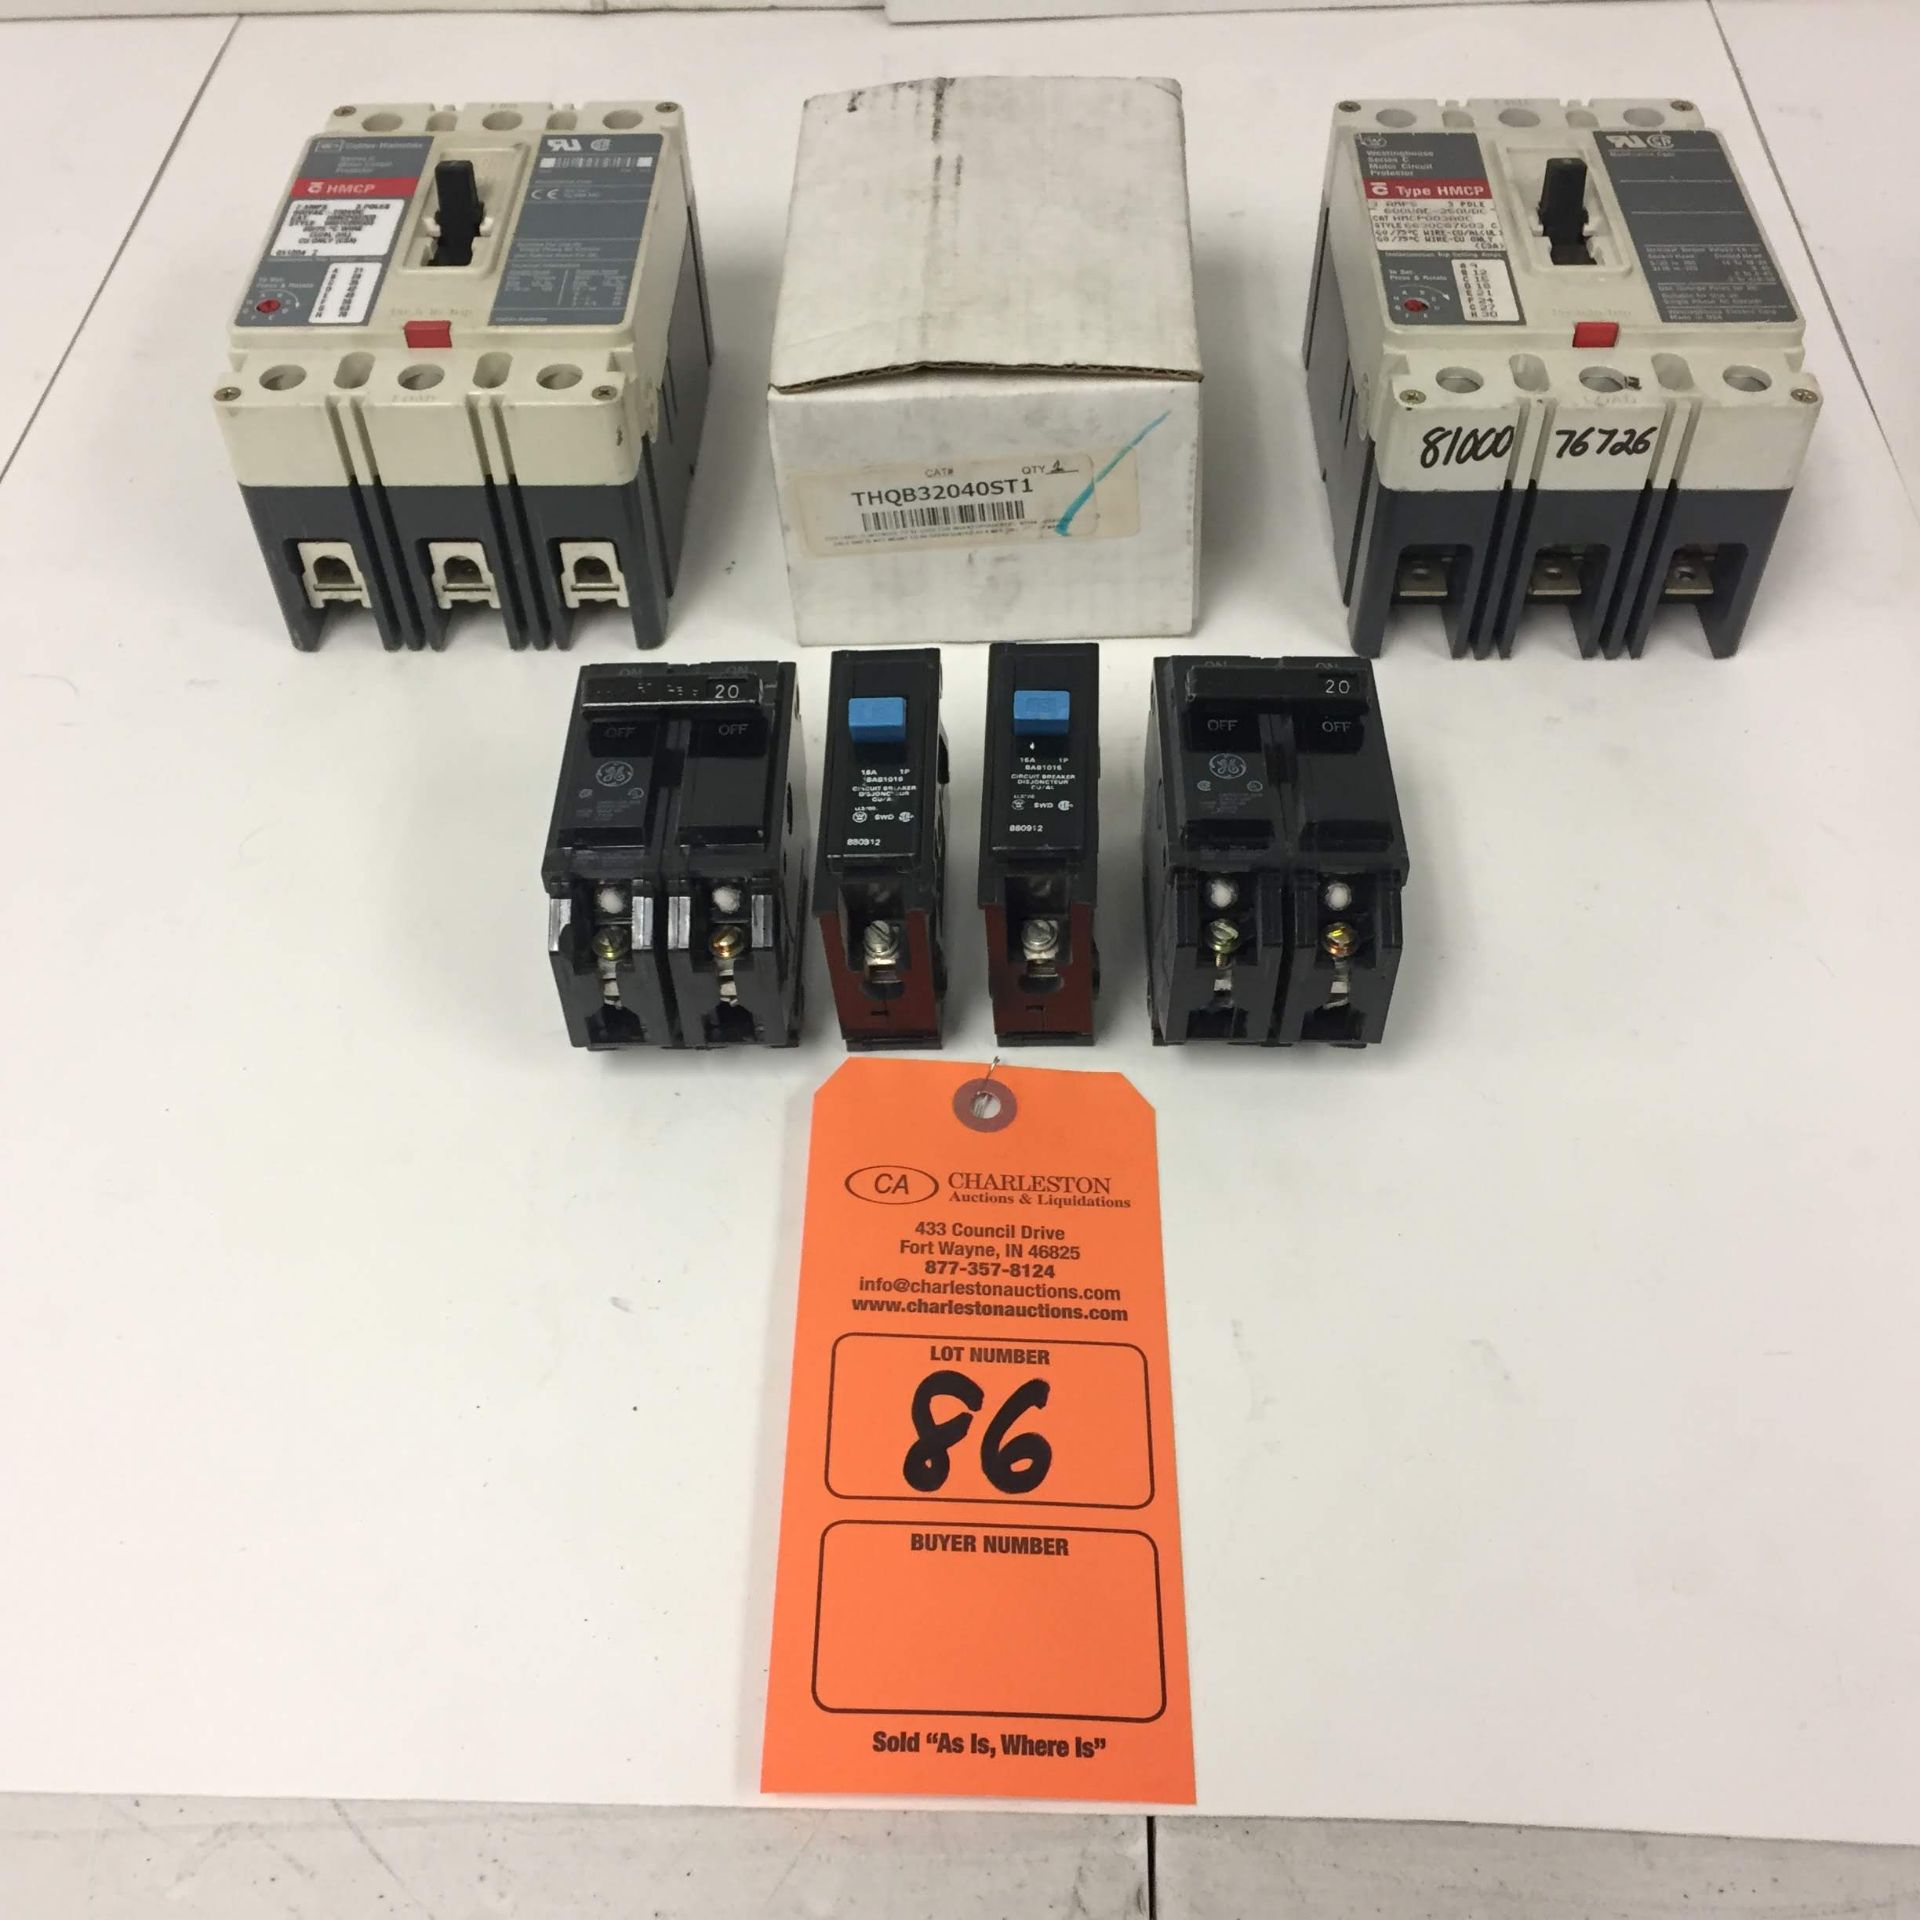 (7) MISC BRANDED BREAKERS: GE THQB32040ST1 AND ALL OTHER ITEMS INCLUDED IN PHOTOS!